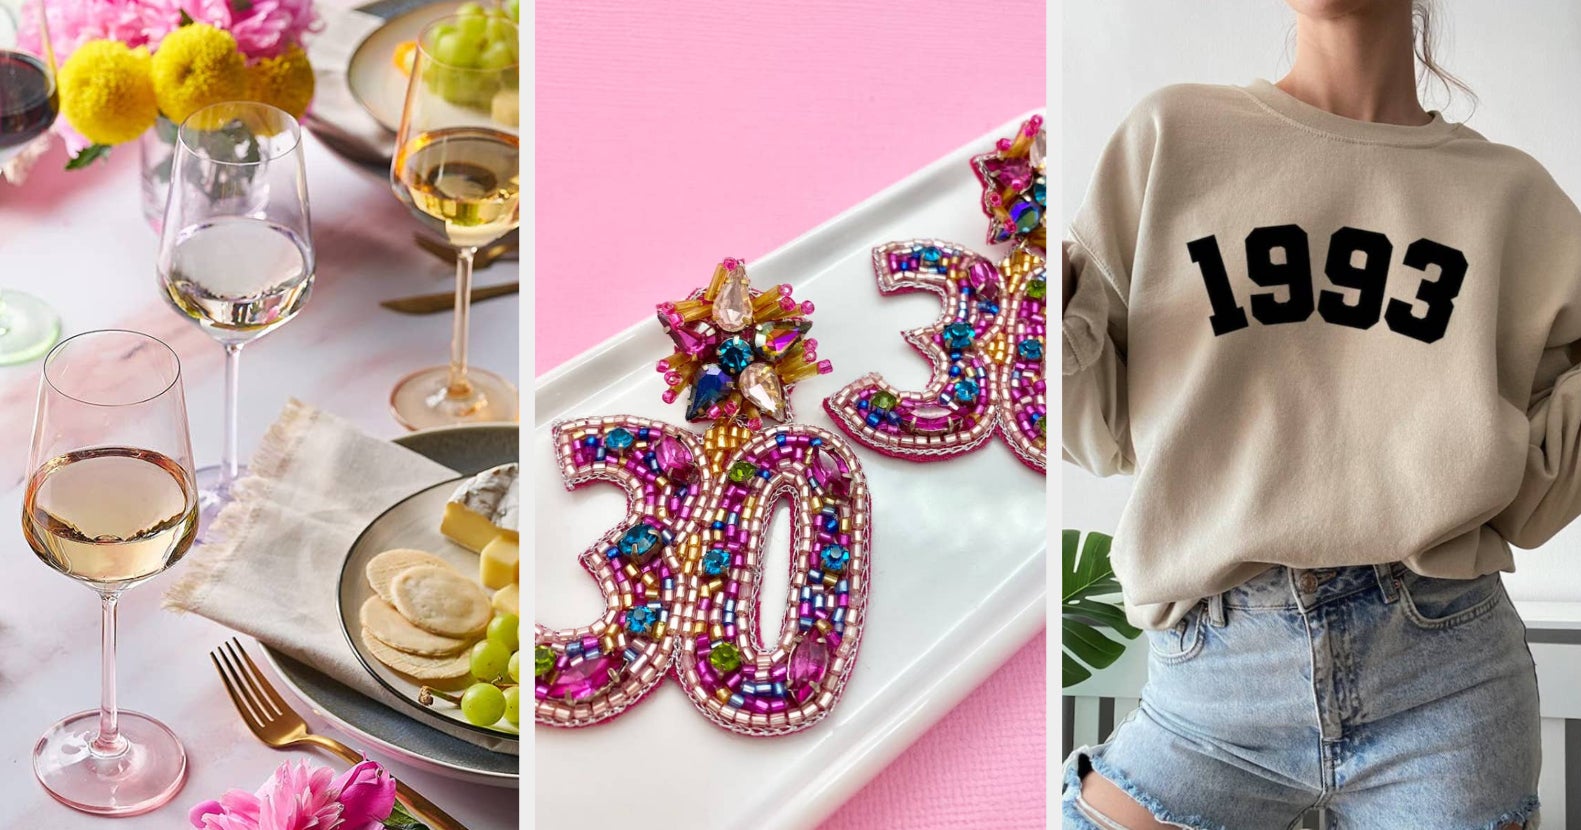 30th Birthday Gifts For Her, 30 Year Old Birthday Gifts For  Women, Cool Gifts For 30 Year Old Woman, 1993 Birthday Gifts For Women,  Fabulous Gift Idea For 30 Year